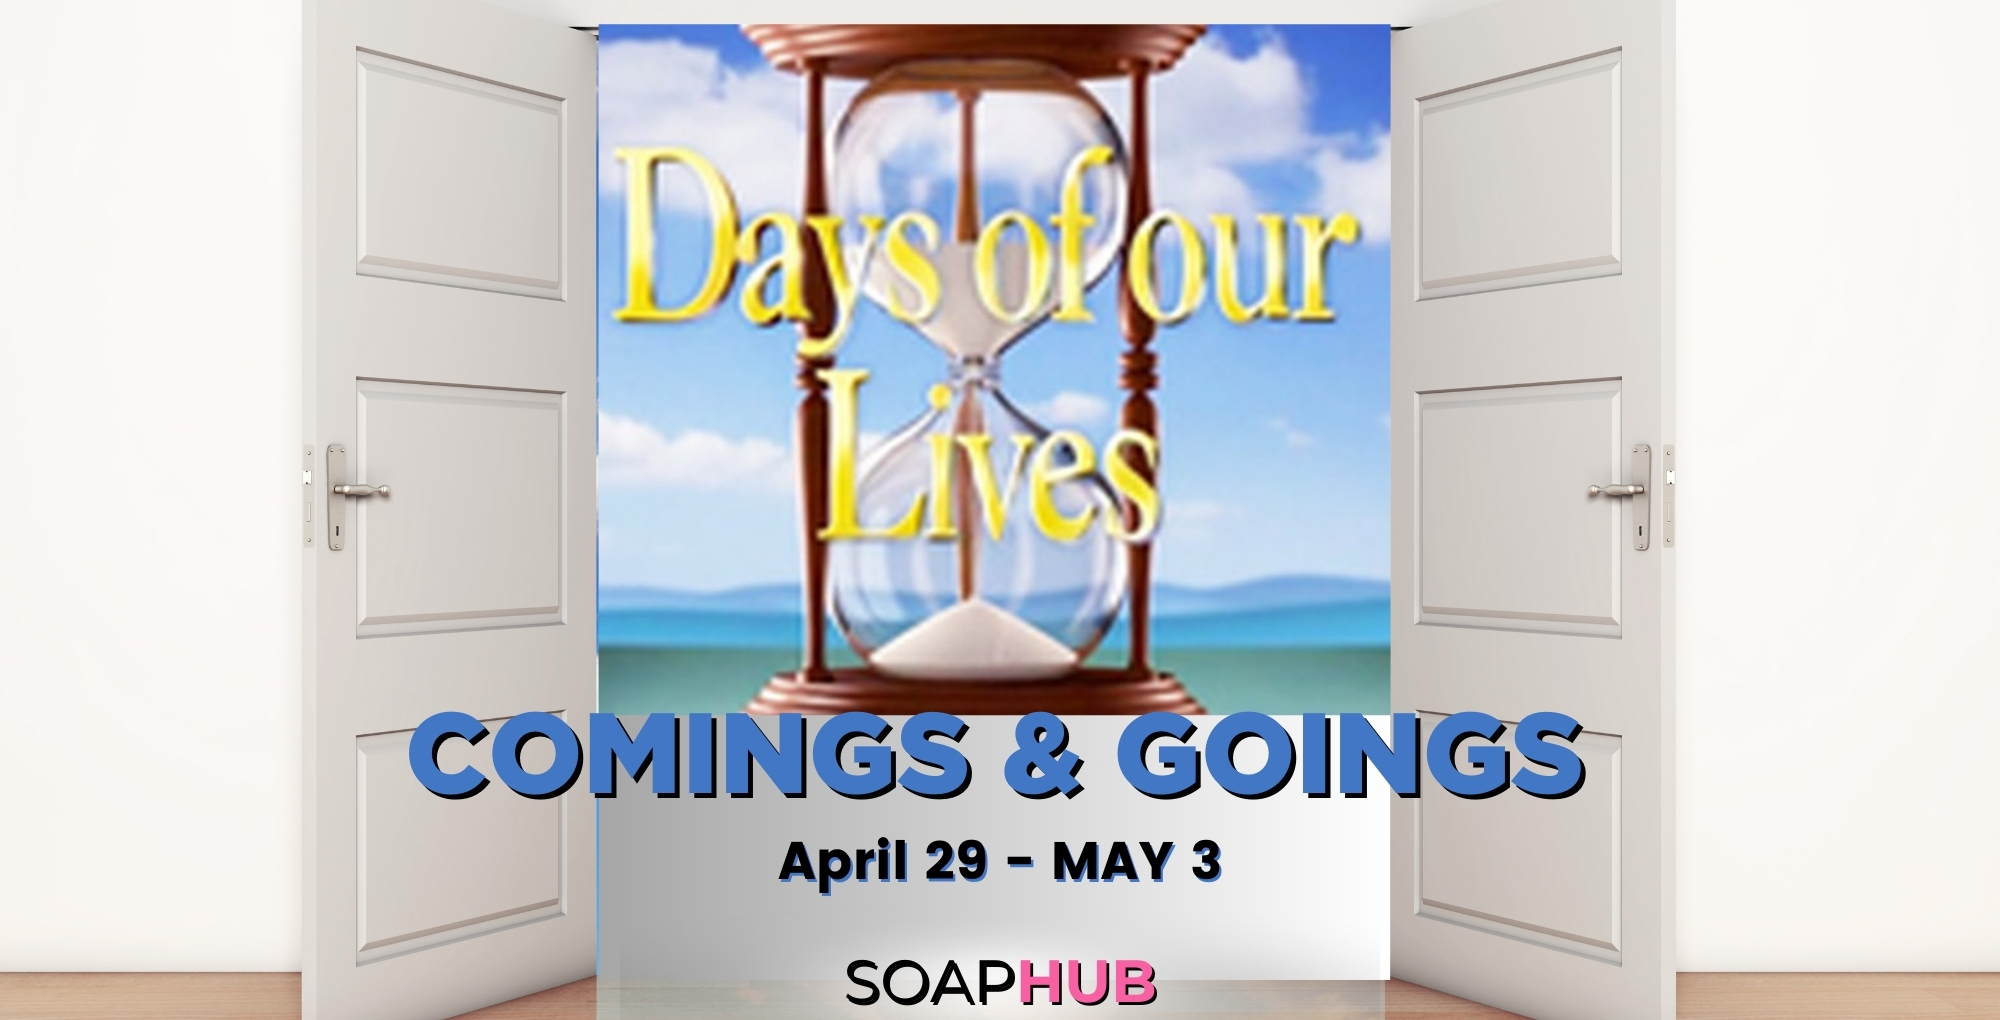 Days of our Lives comings and goings for April 29 - May 3 with the Soap Hub logo.